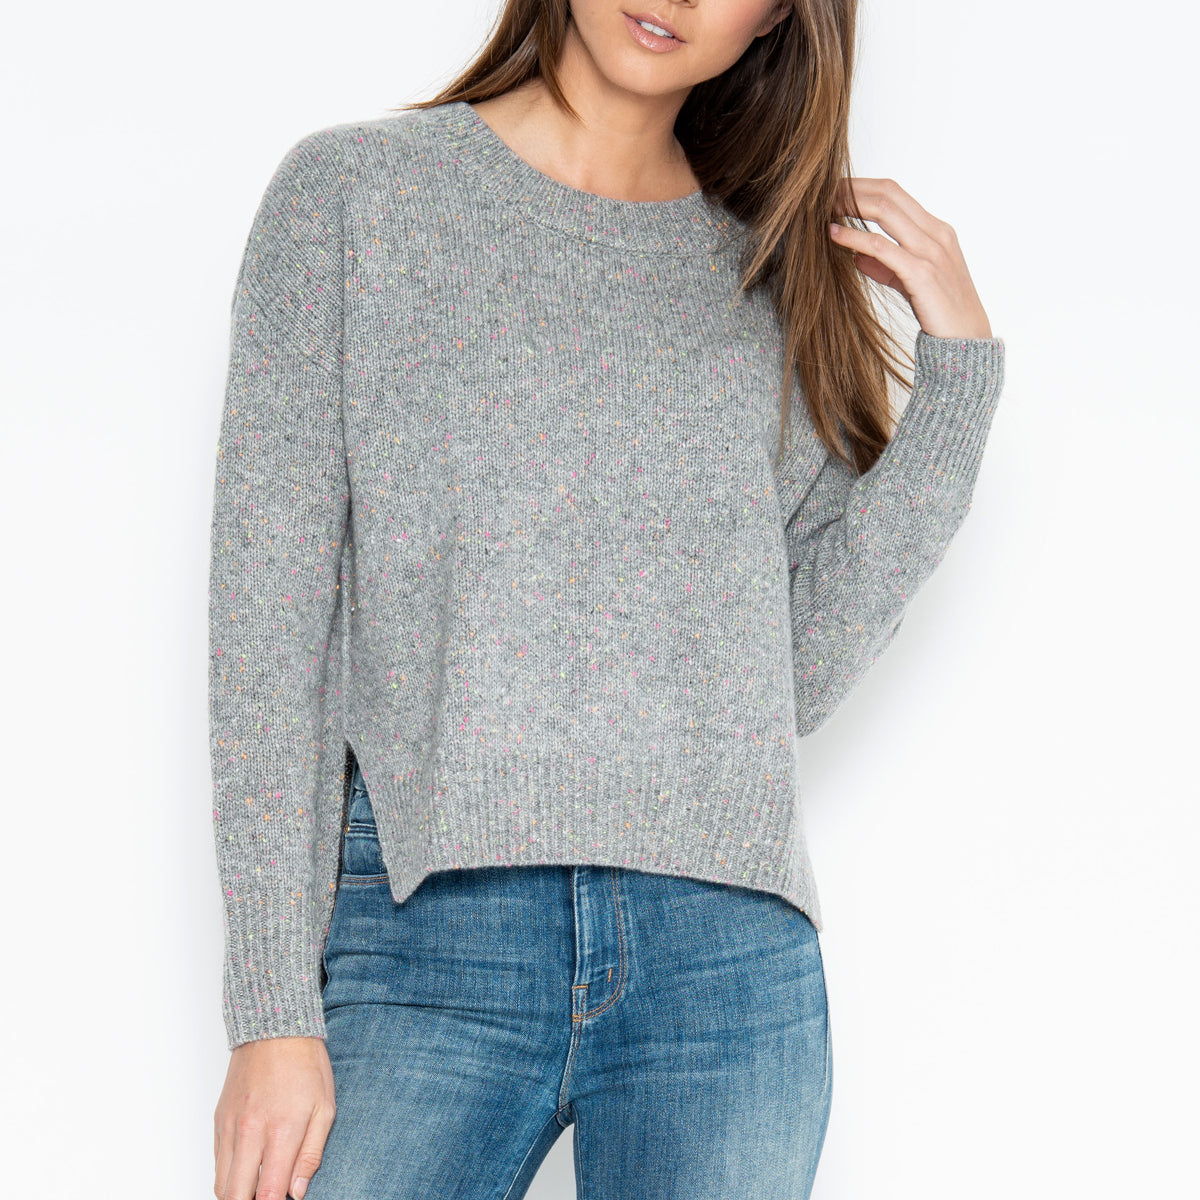 Scoop Hem Cashmere Sweater with Heart Elbow Patches - Light Grey/Lavender